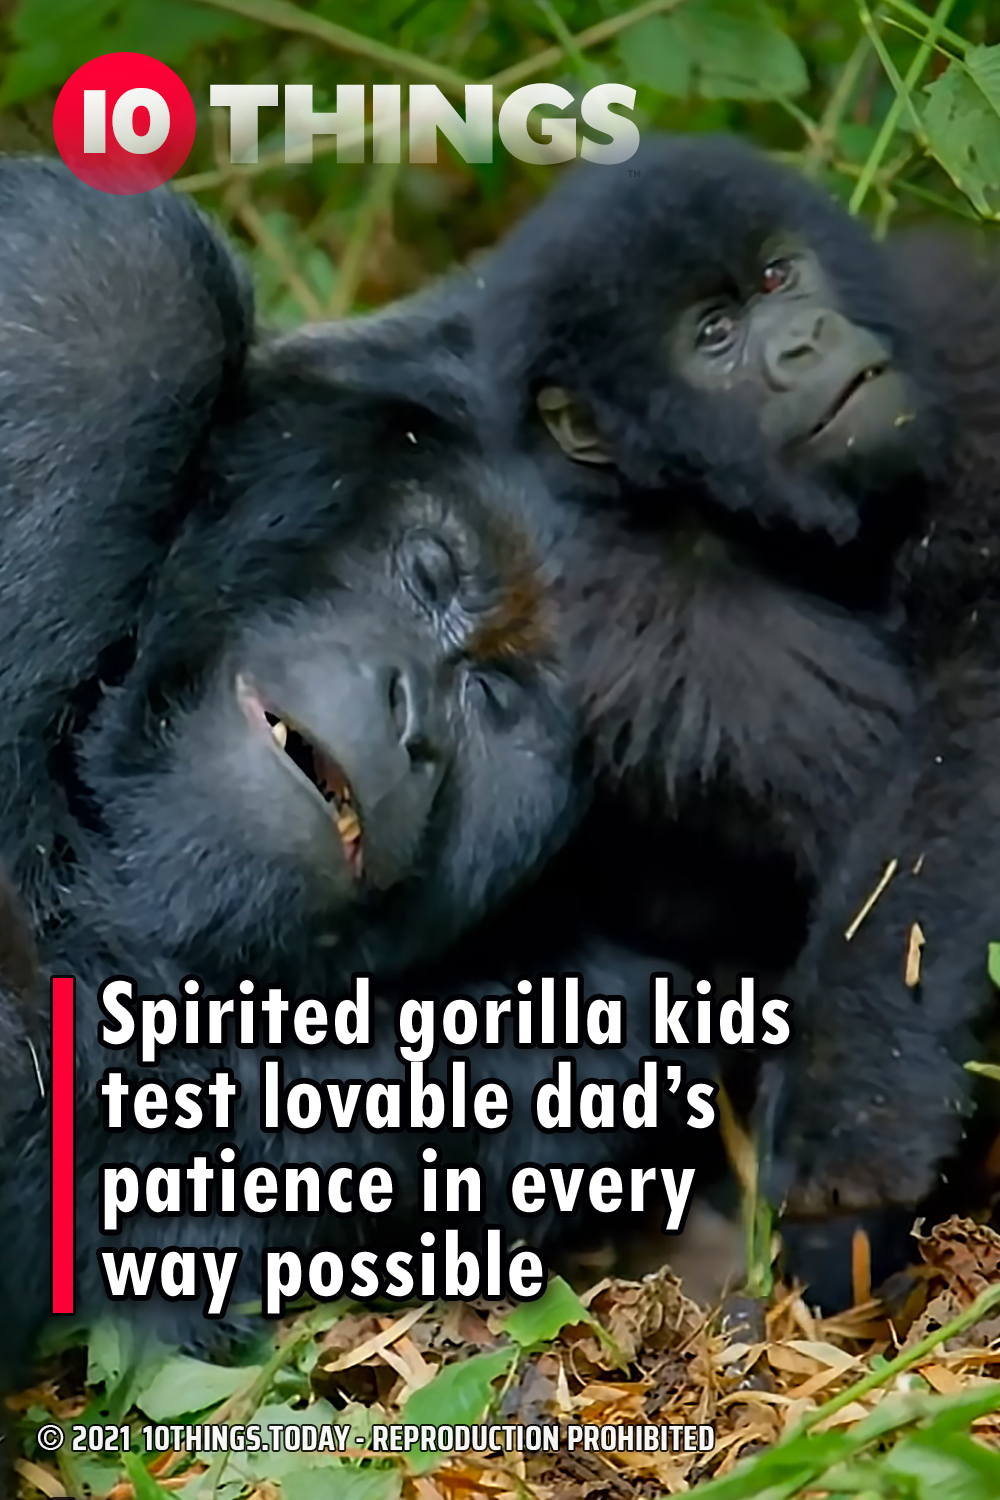 Spirited gorilla kids test lovable dad’s patience in every way possible